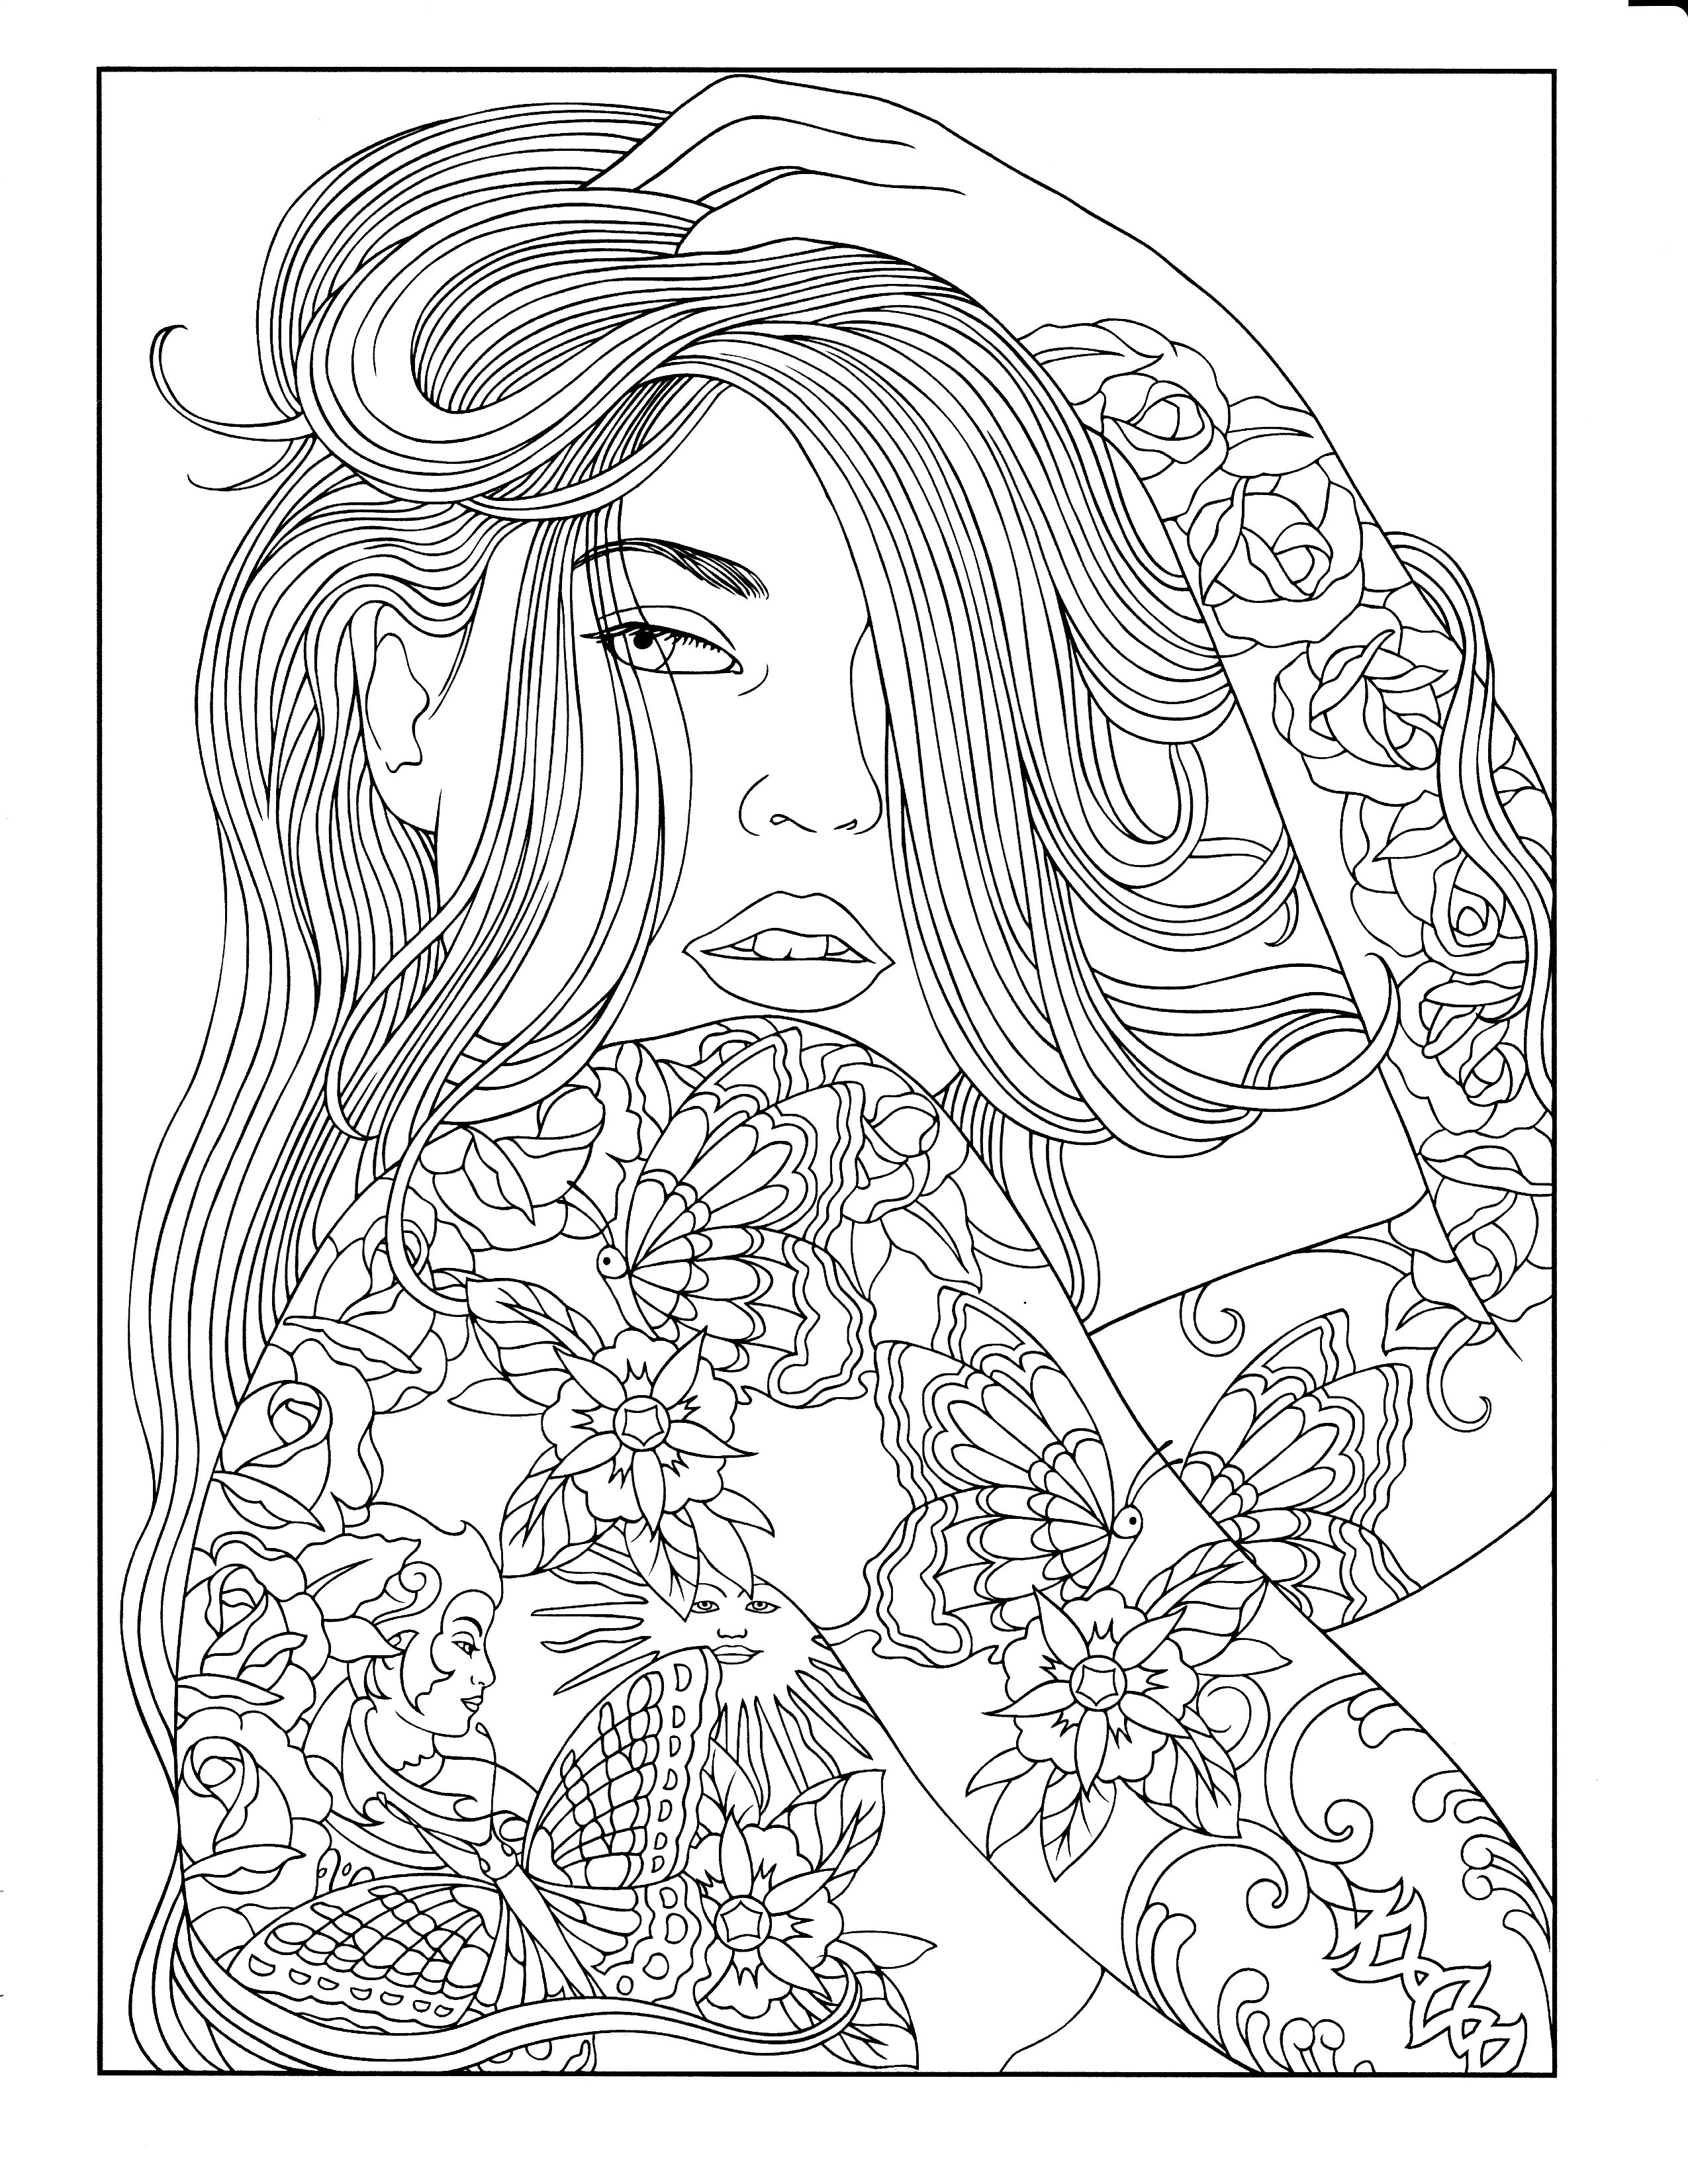 Realistic Coloring Pages For Adults at Free